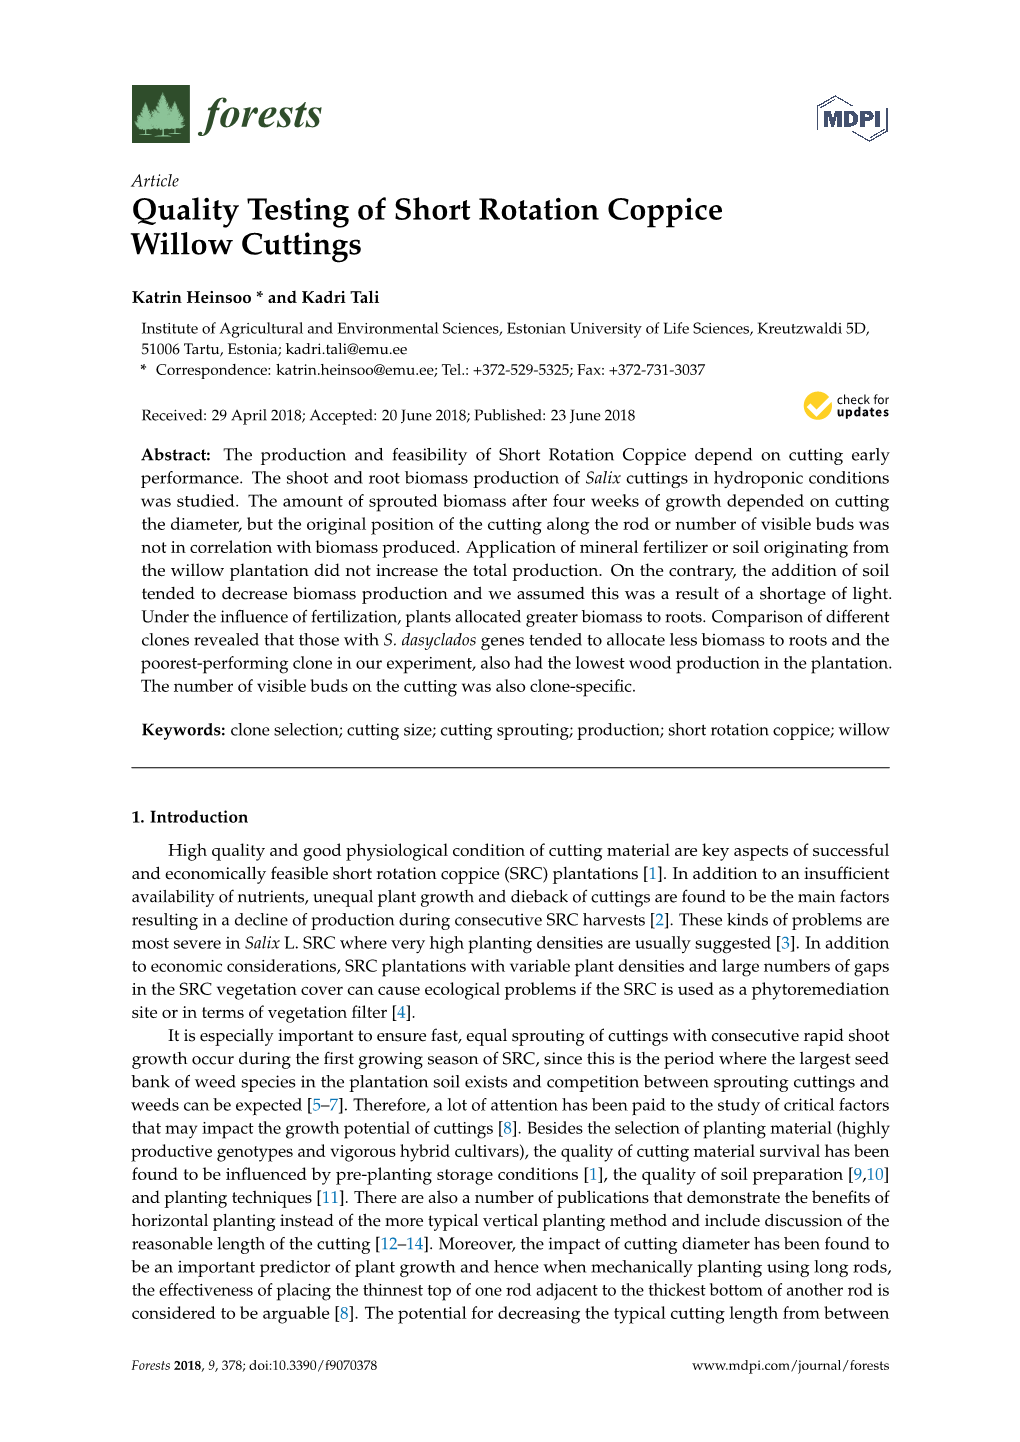 Quality Testing of Short Rotation Coppice Willow Cuttings